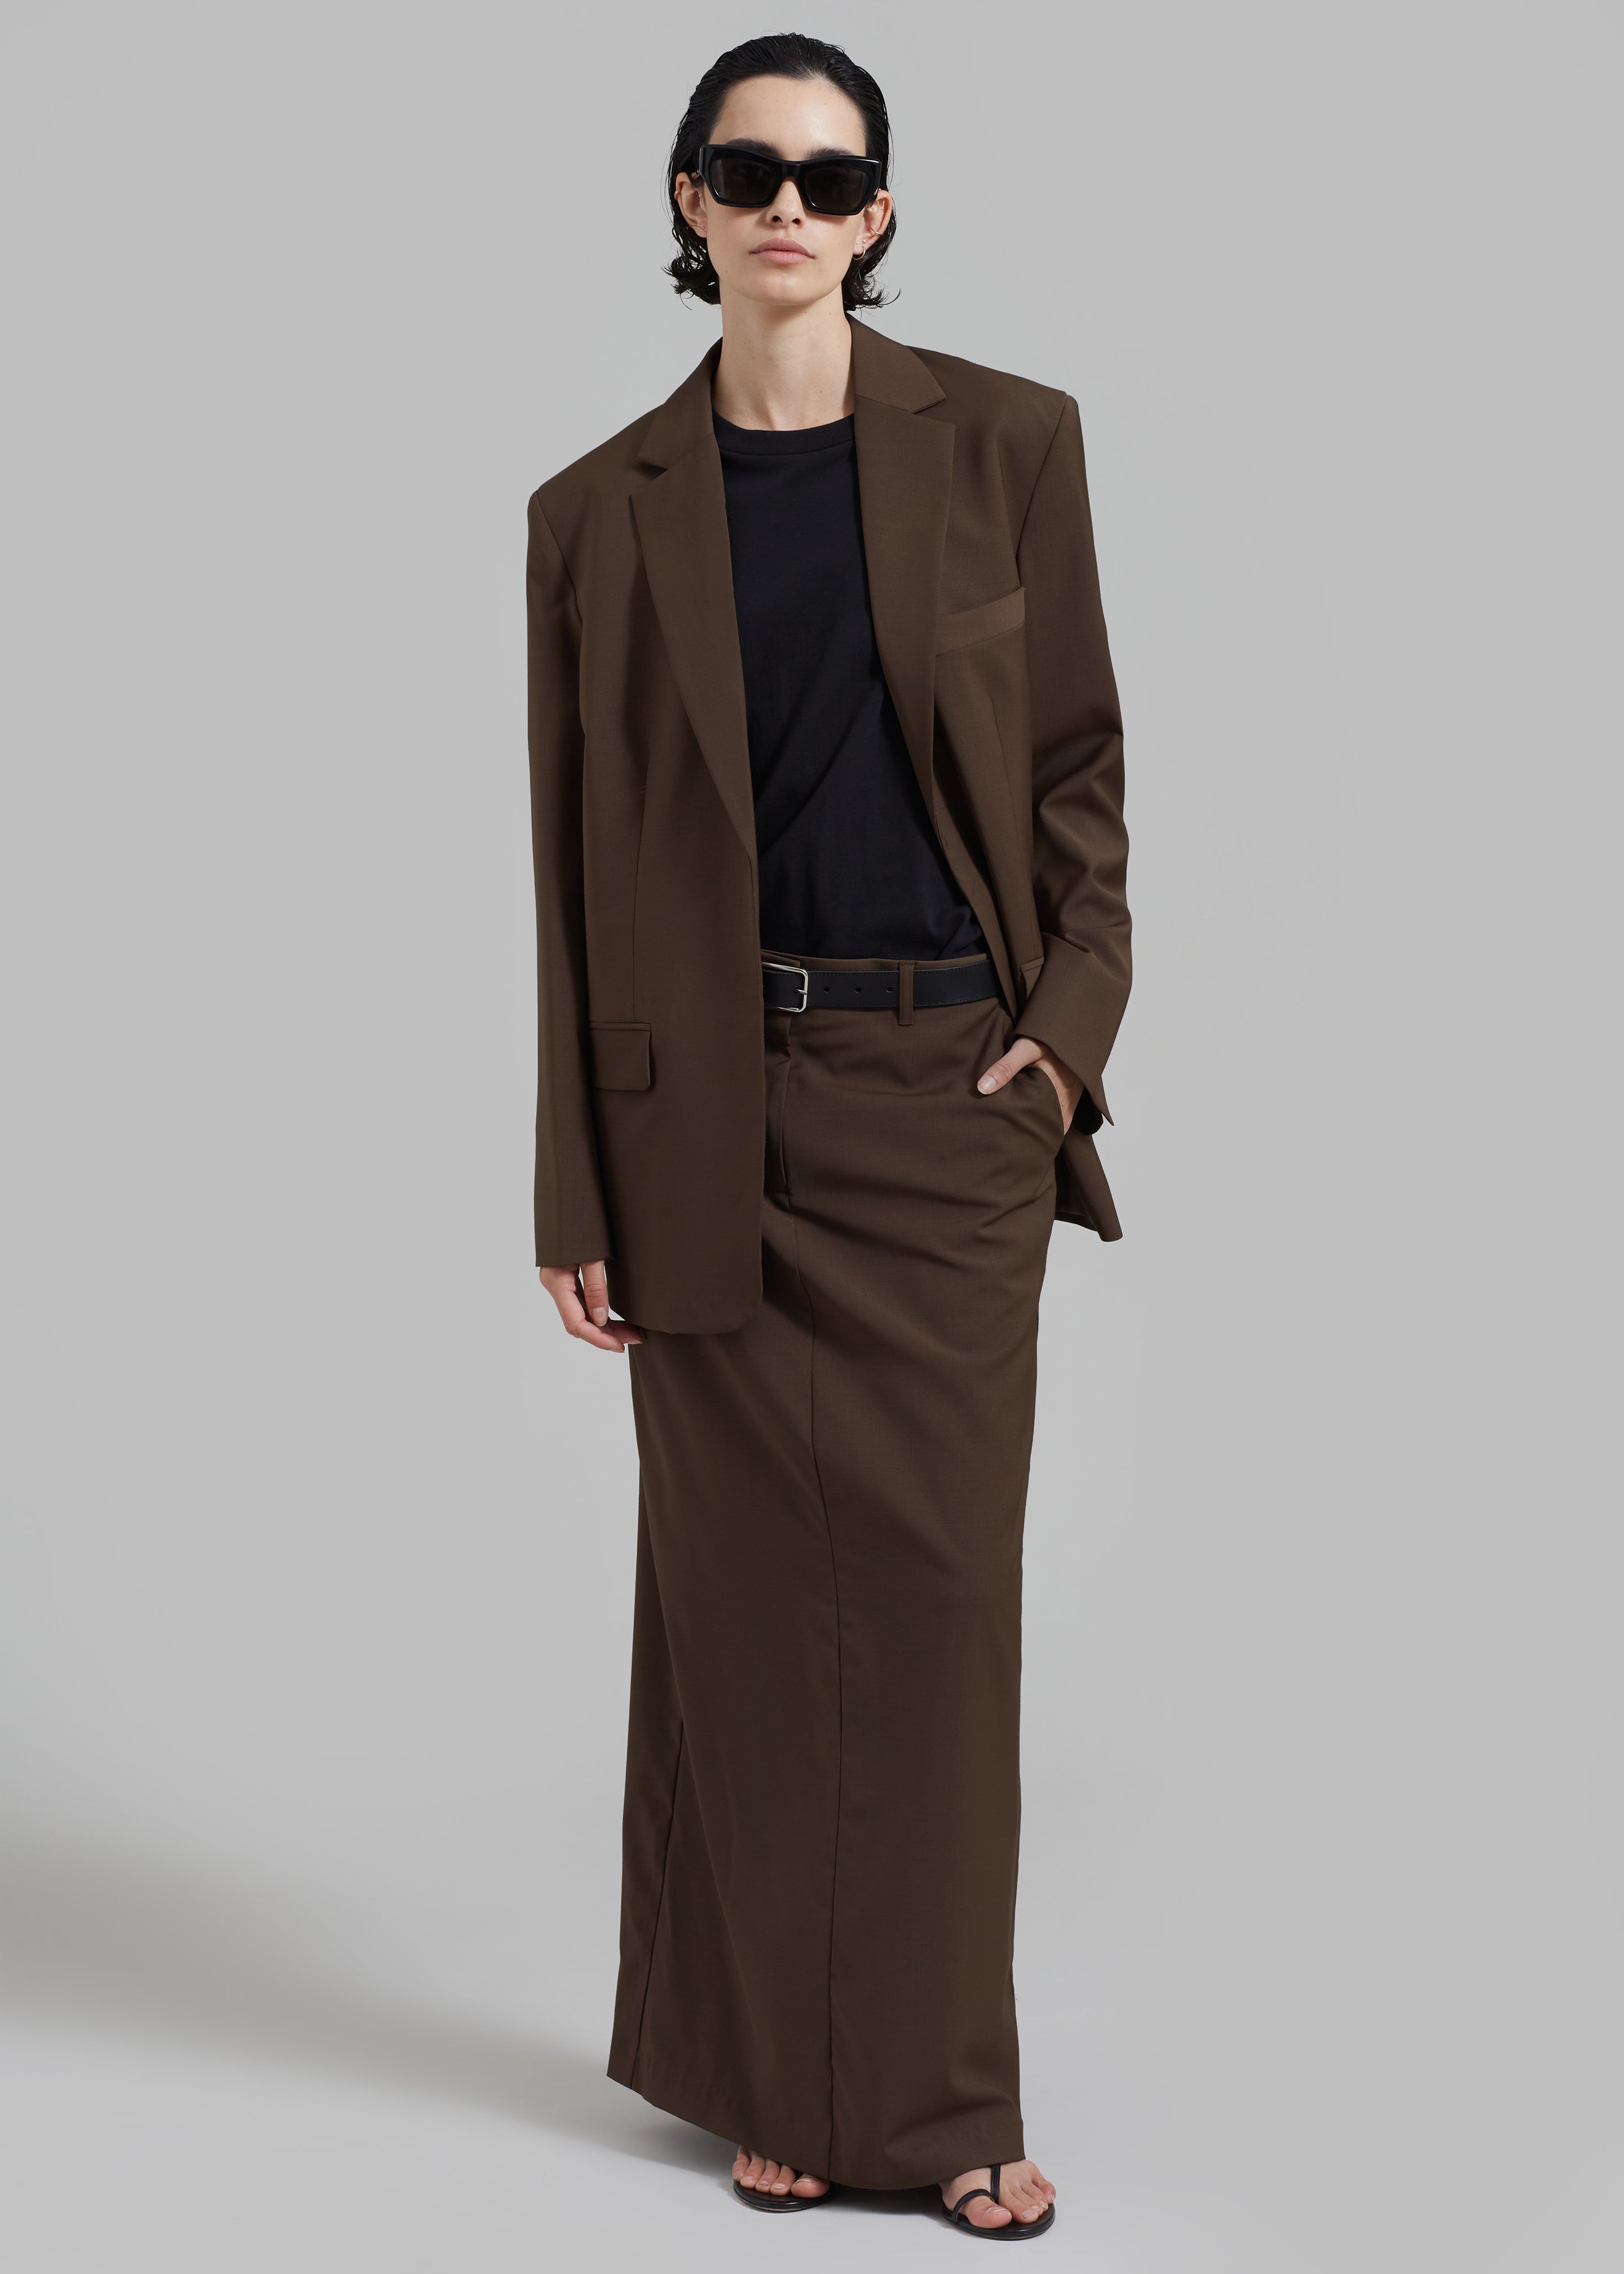 Matteau Relaxed Tailored Skirt - Coffee - 6